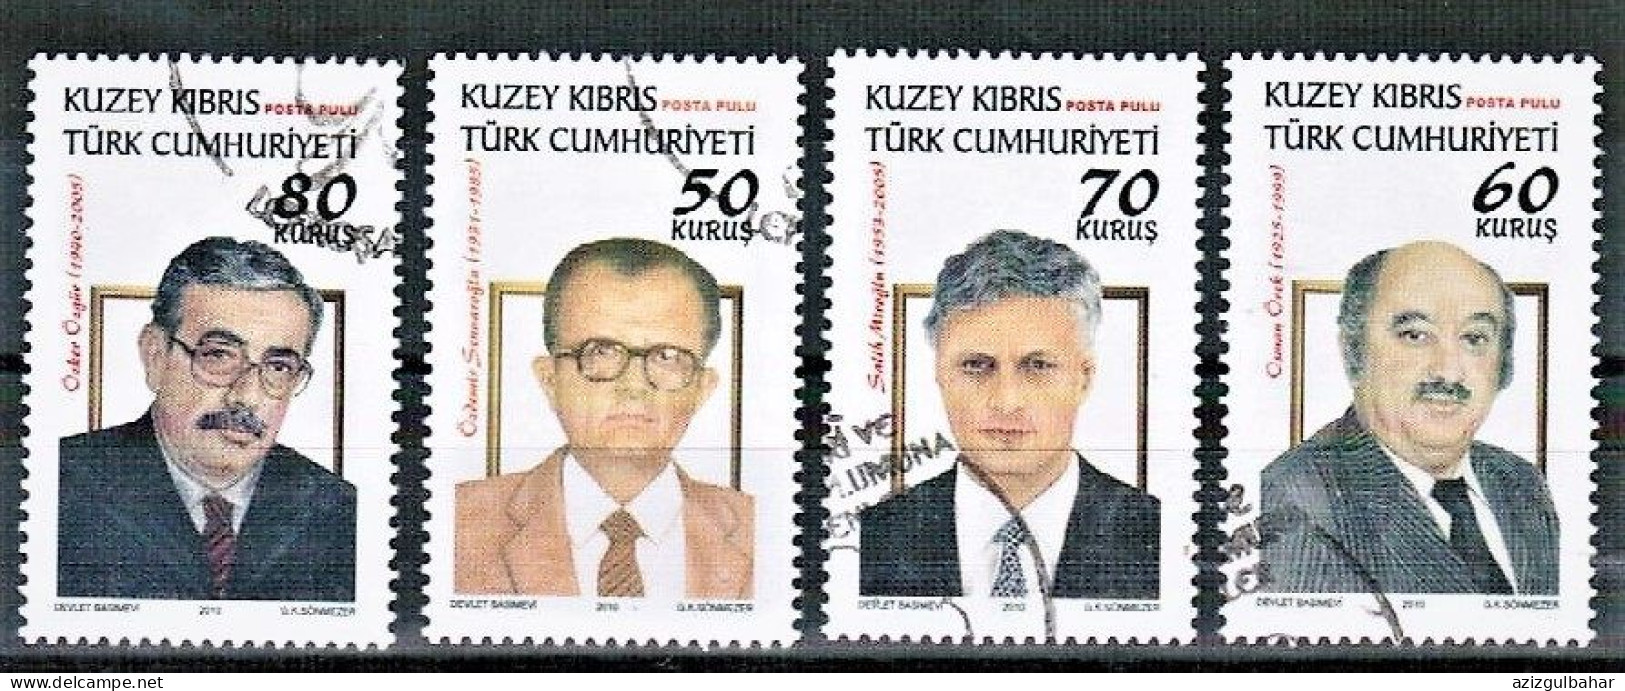 2010 - FAMOUS PEOPLE  - ANNIVERSARIES - TURKISH CYPRIOT STAMPS - STAMPS - USED - Used Stamps